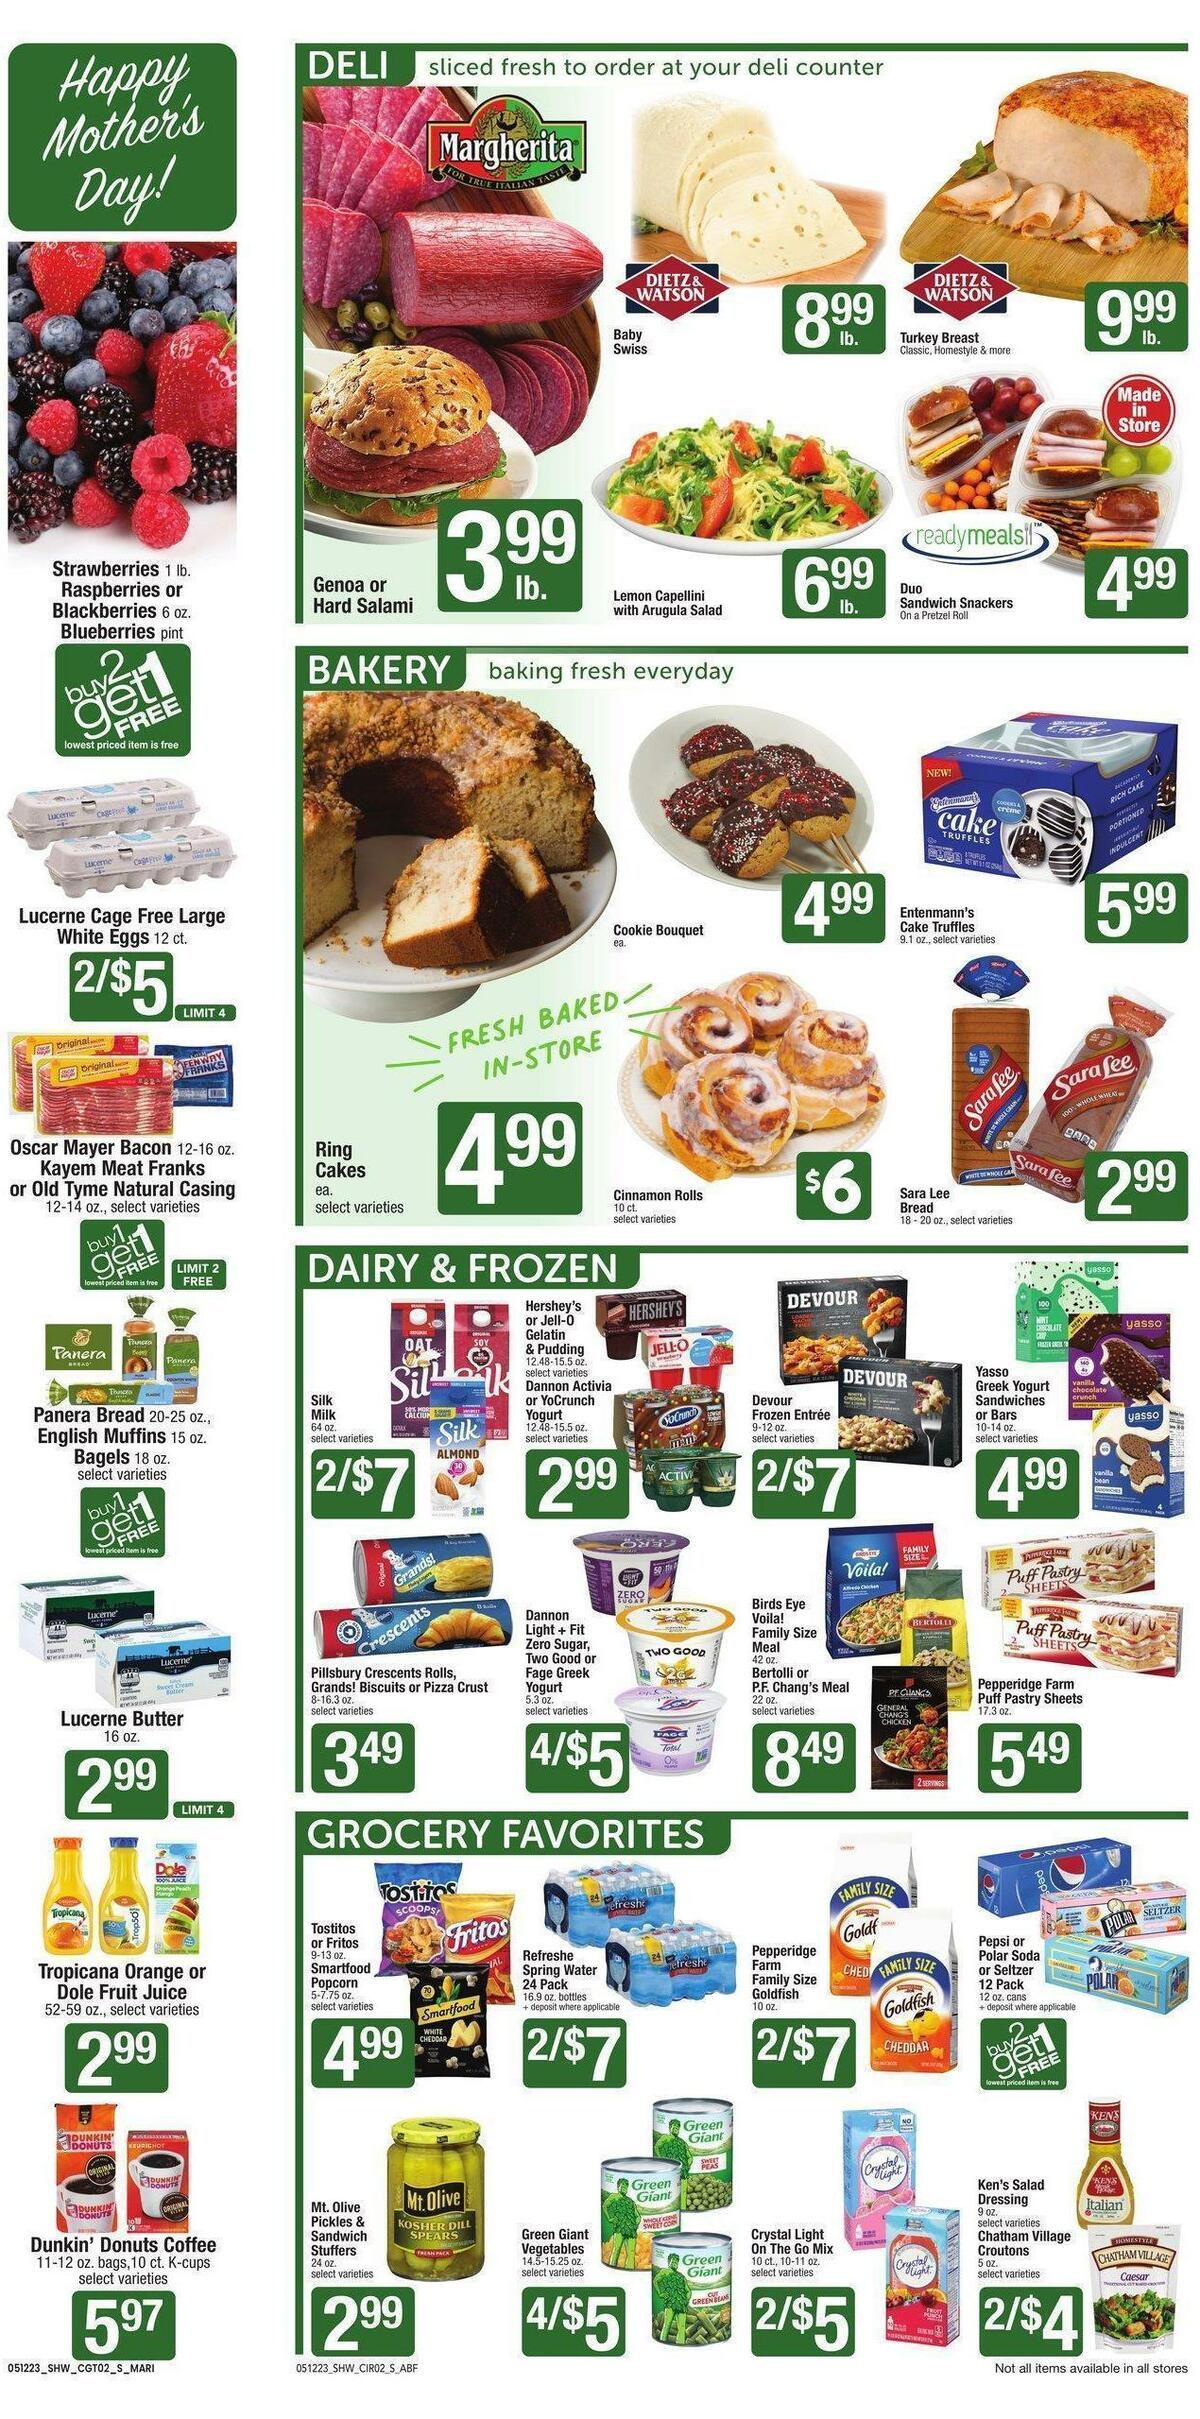 Shaw's Weekly Ad from May 12